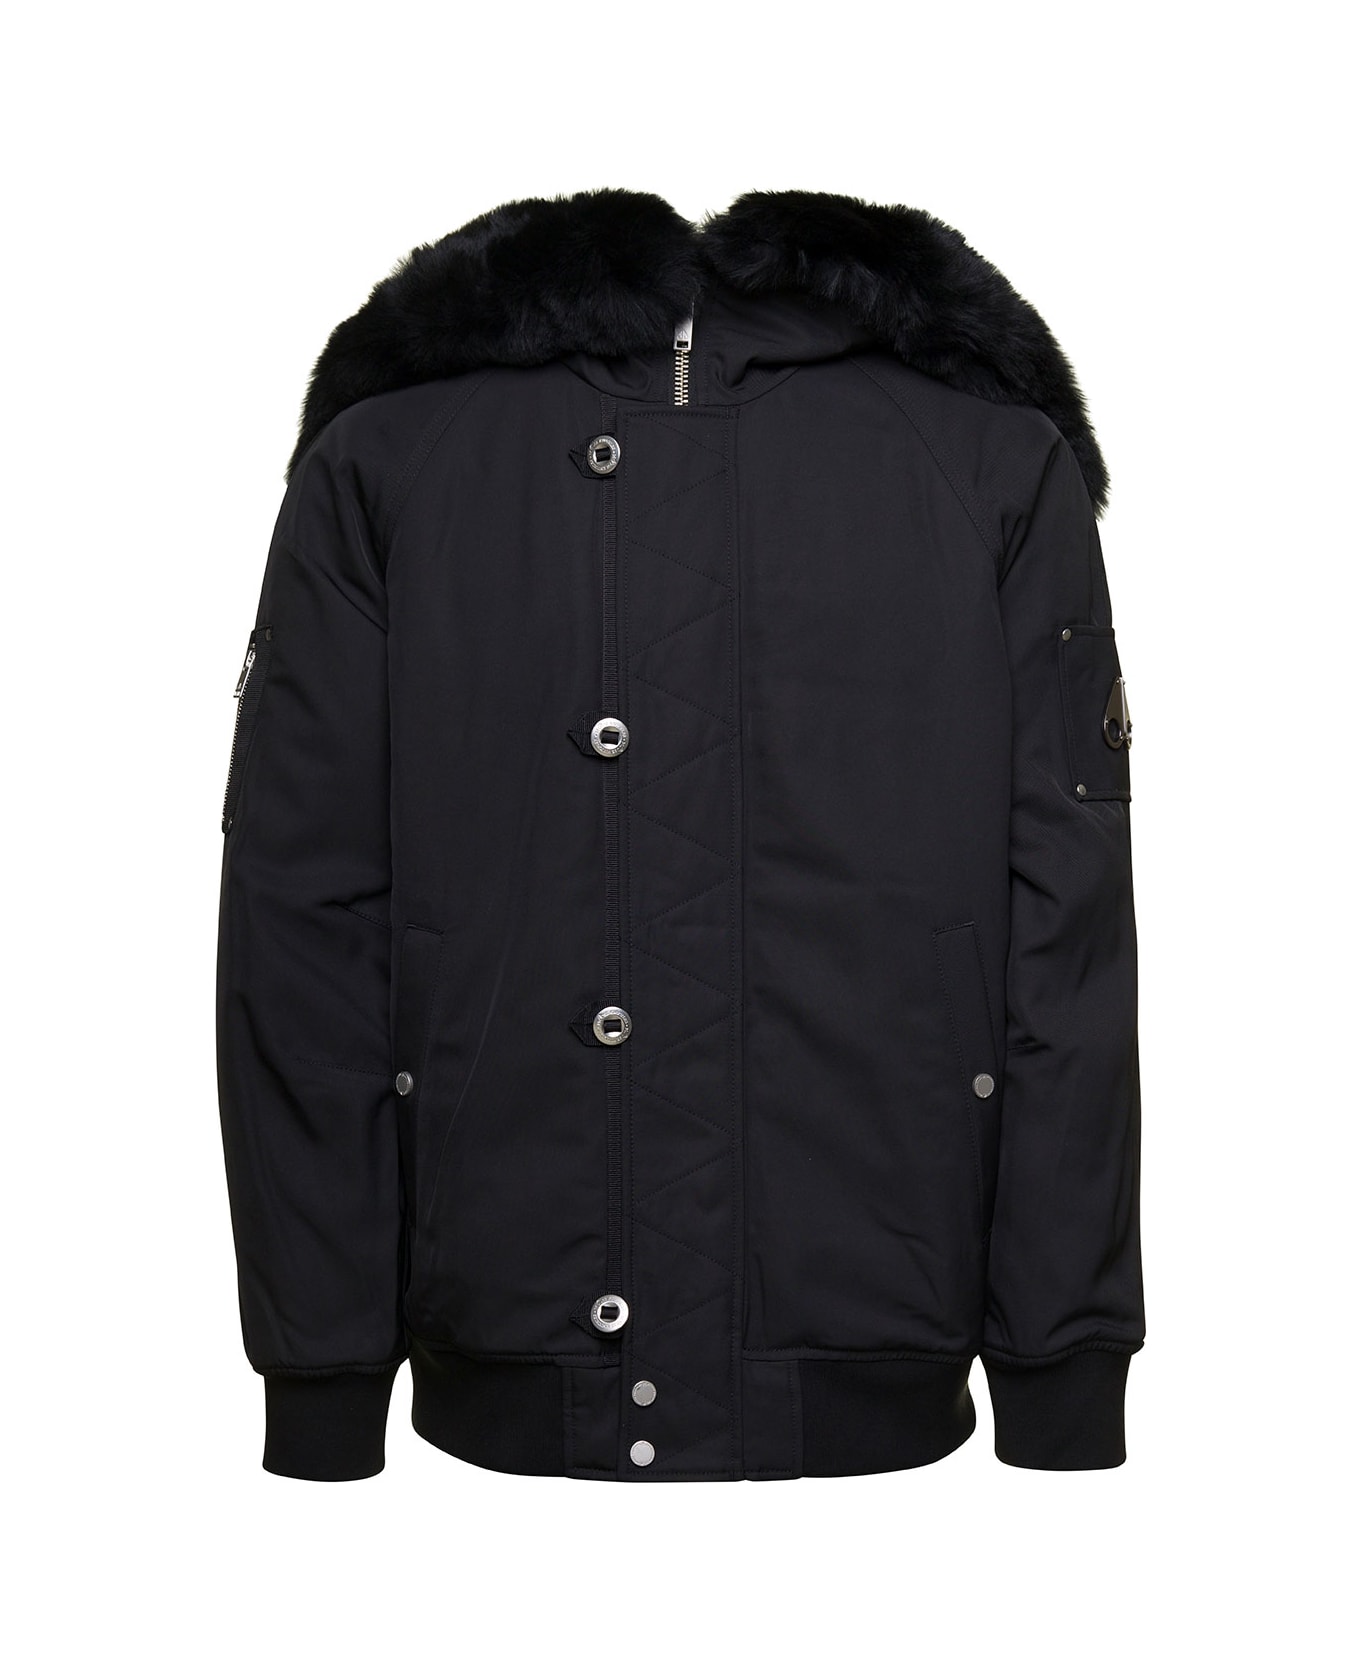 Moose Knuckles Black Zipped All The Way Jacket With Logo Patch In Nylon Man - Black ジャケット